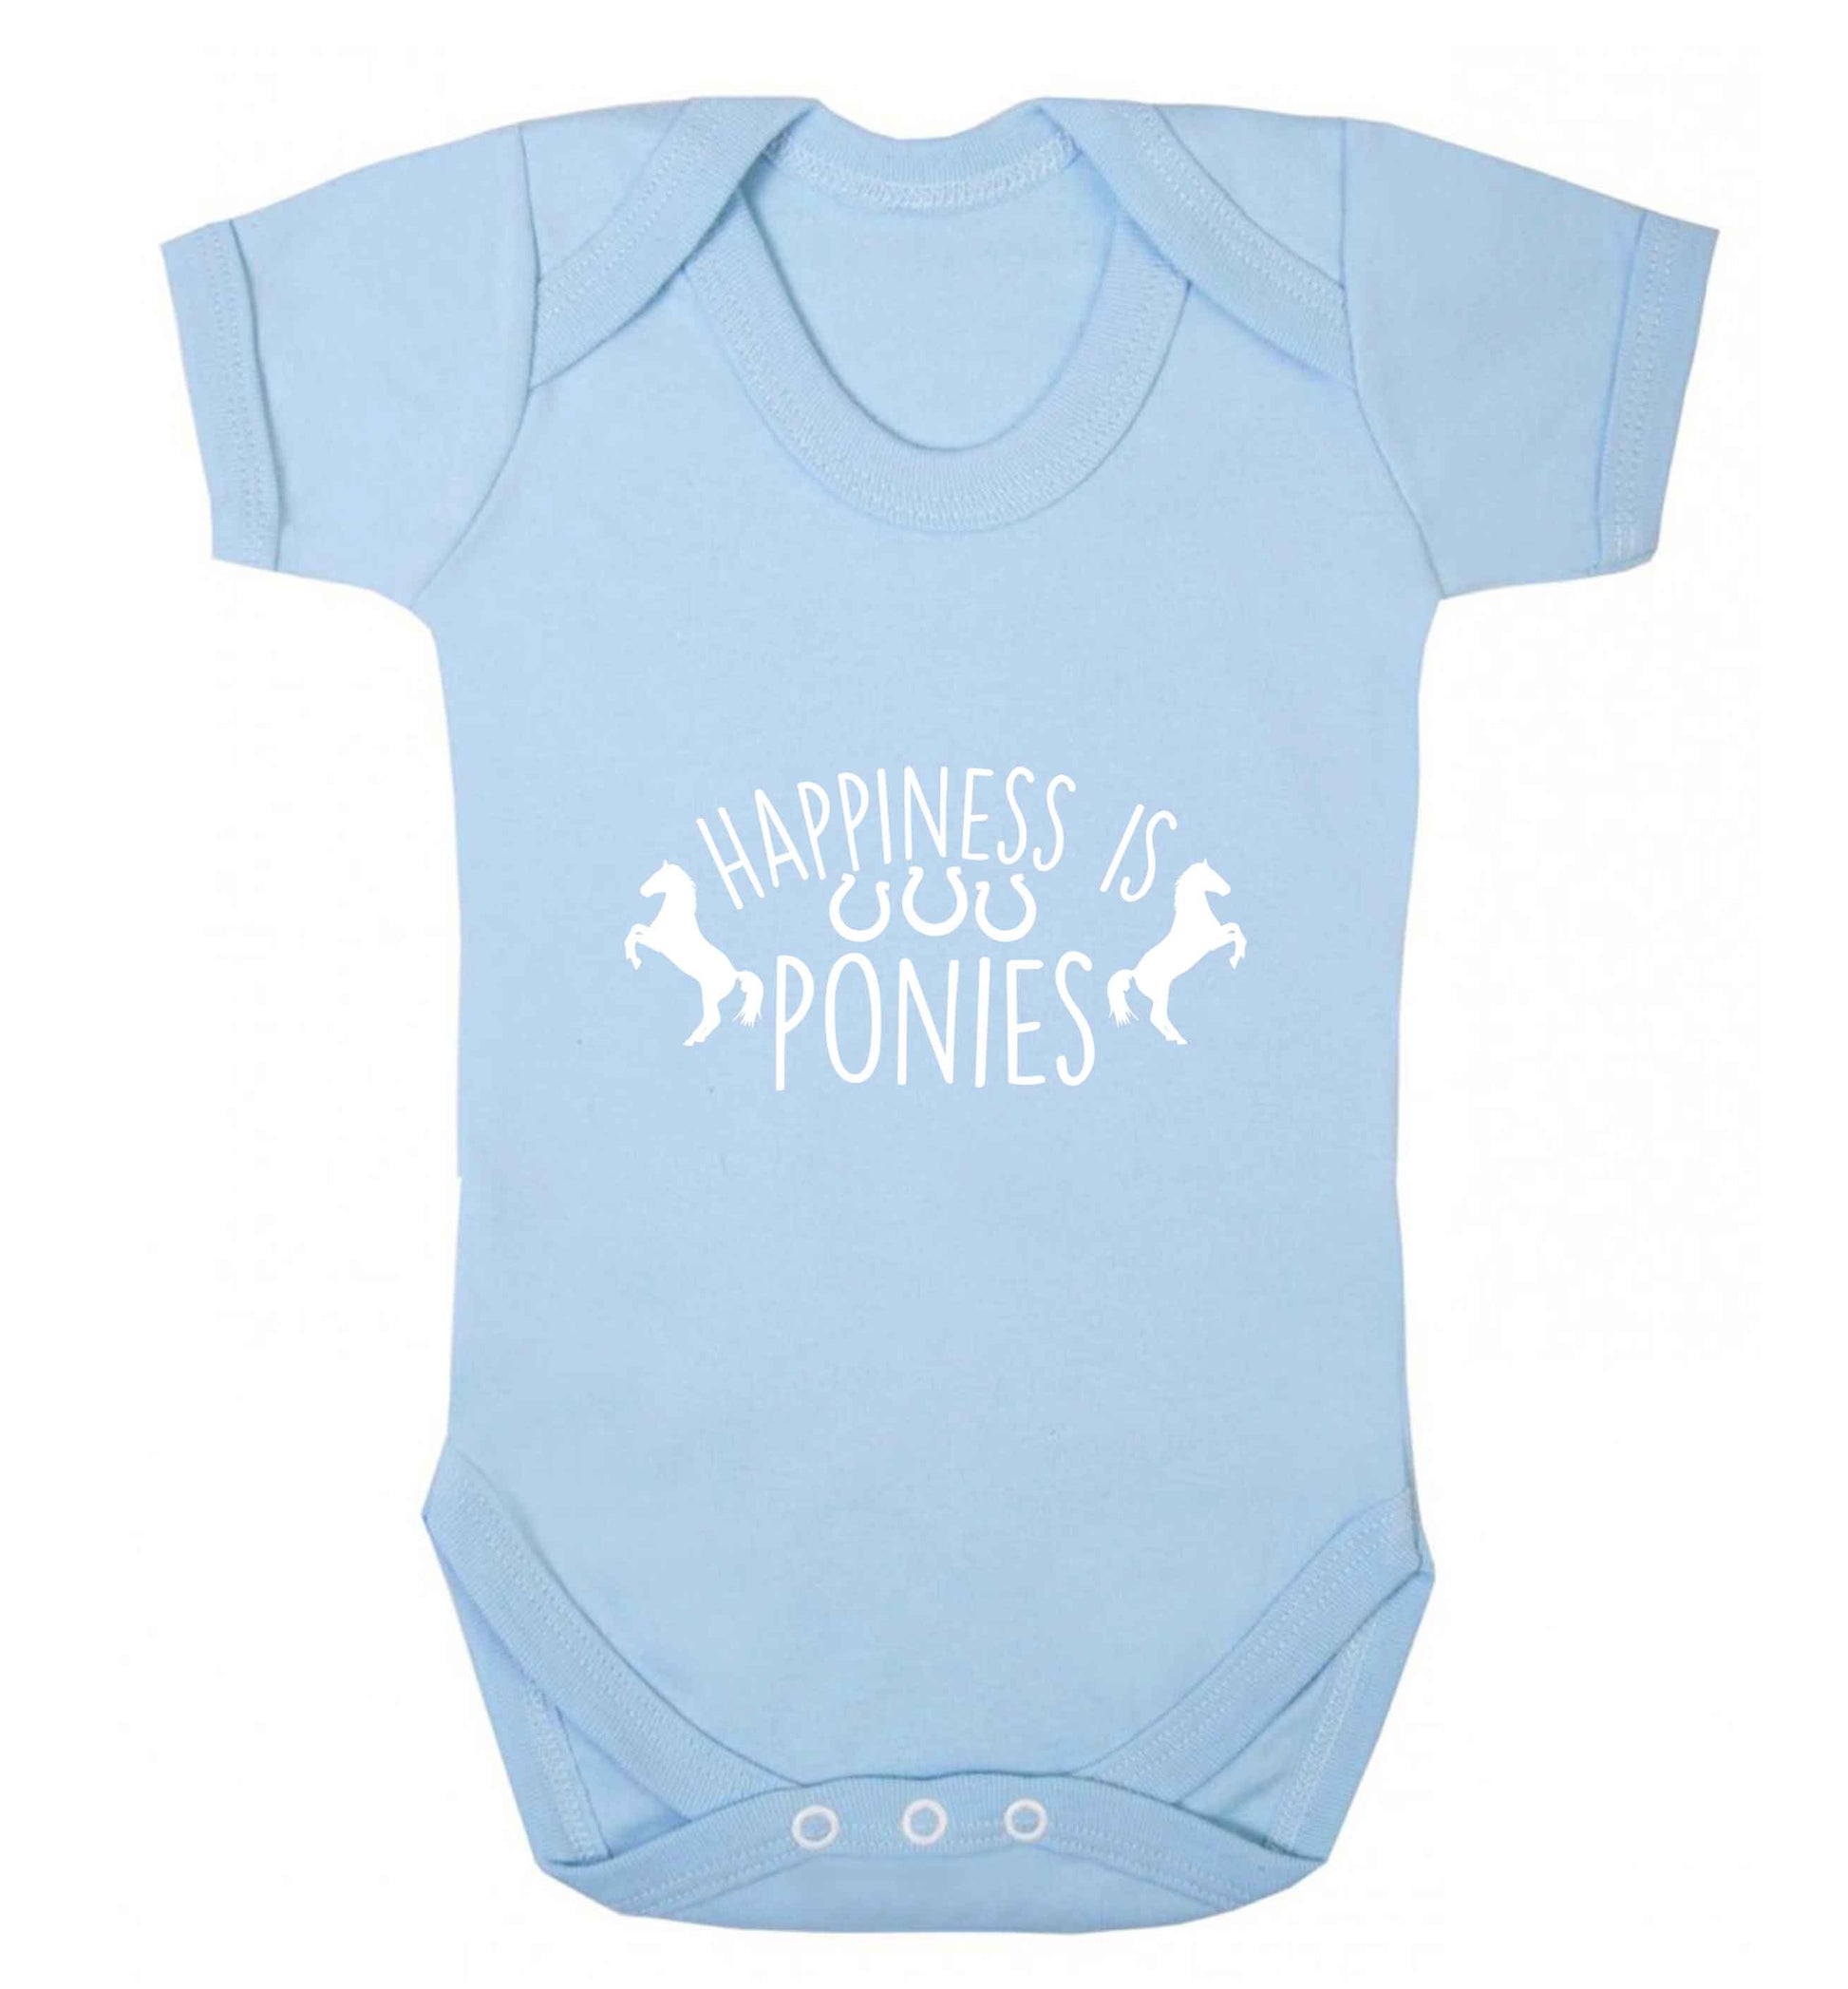 Happiness is ponies baby vest pale blue 18-24 months